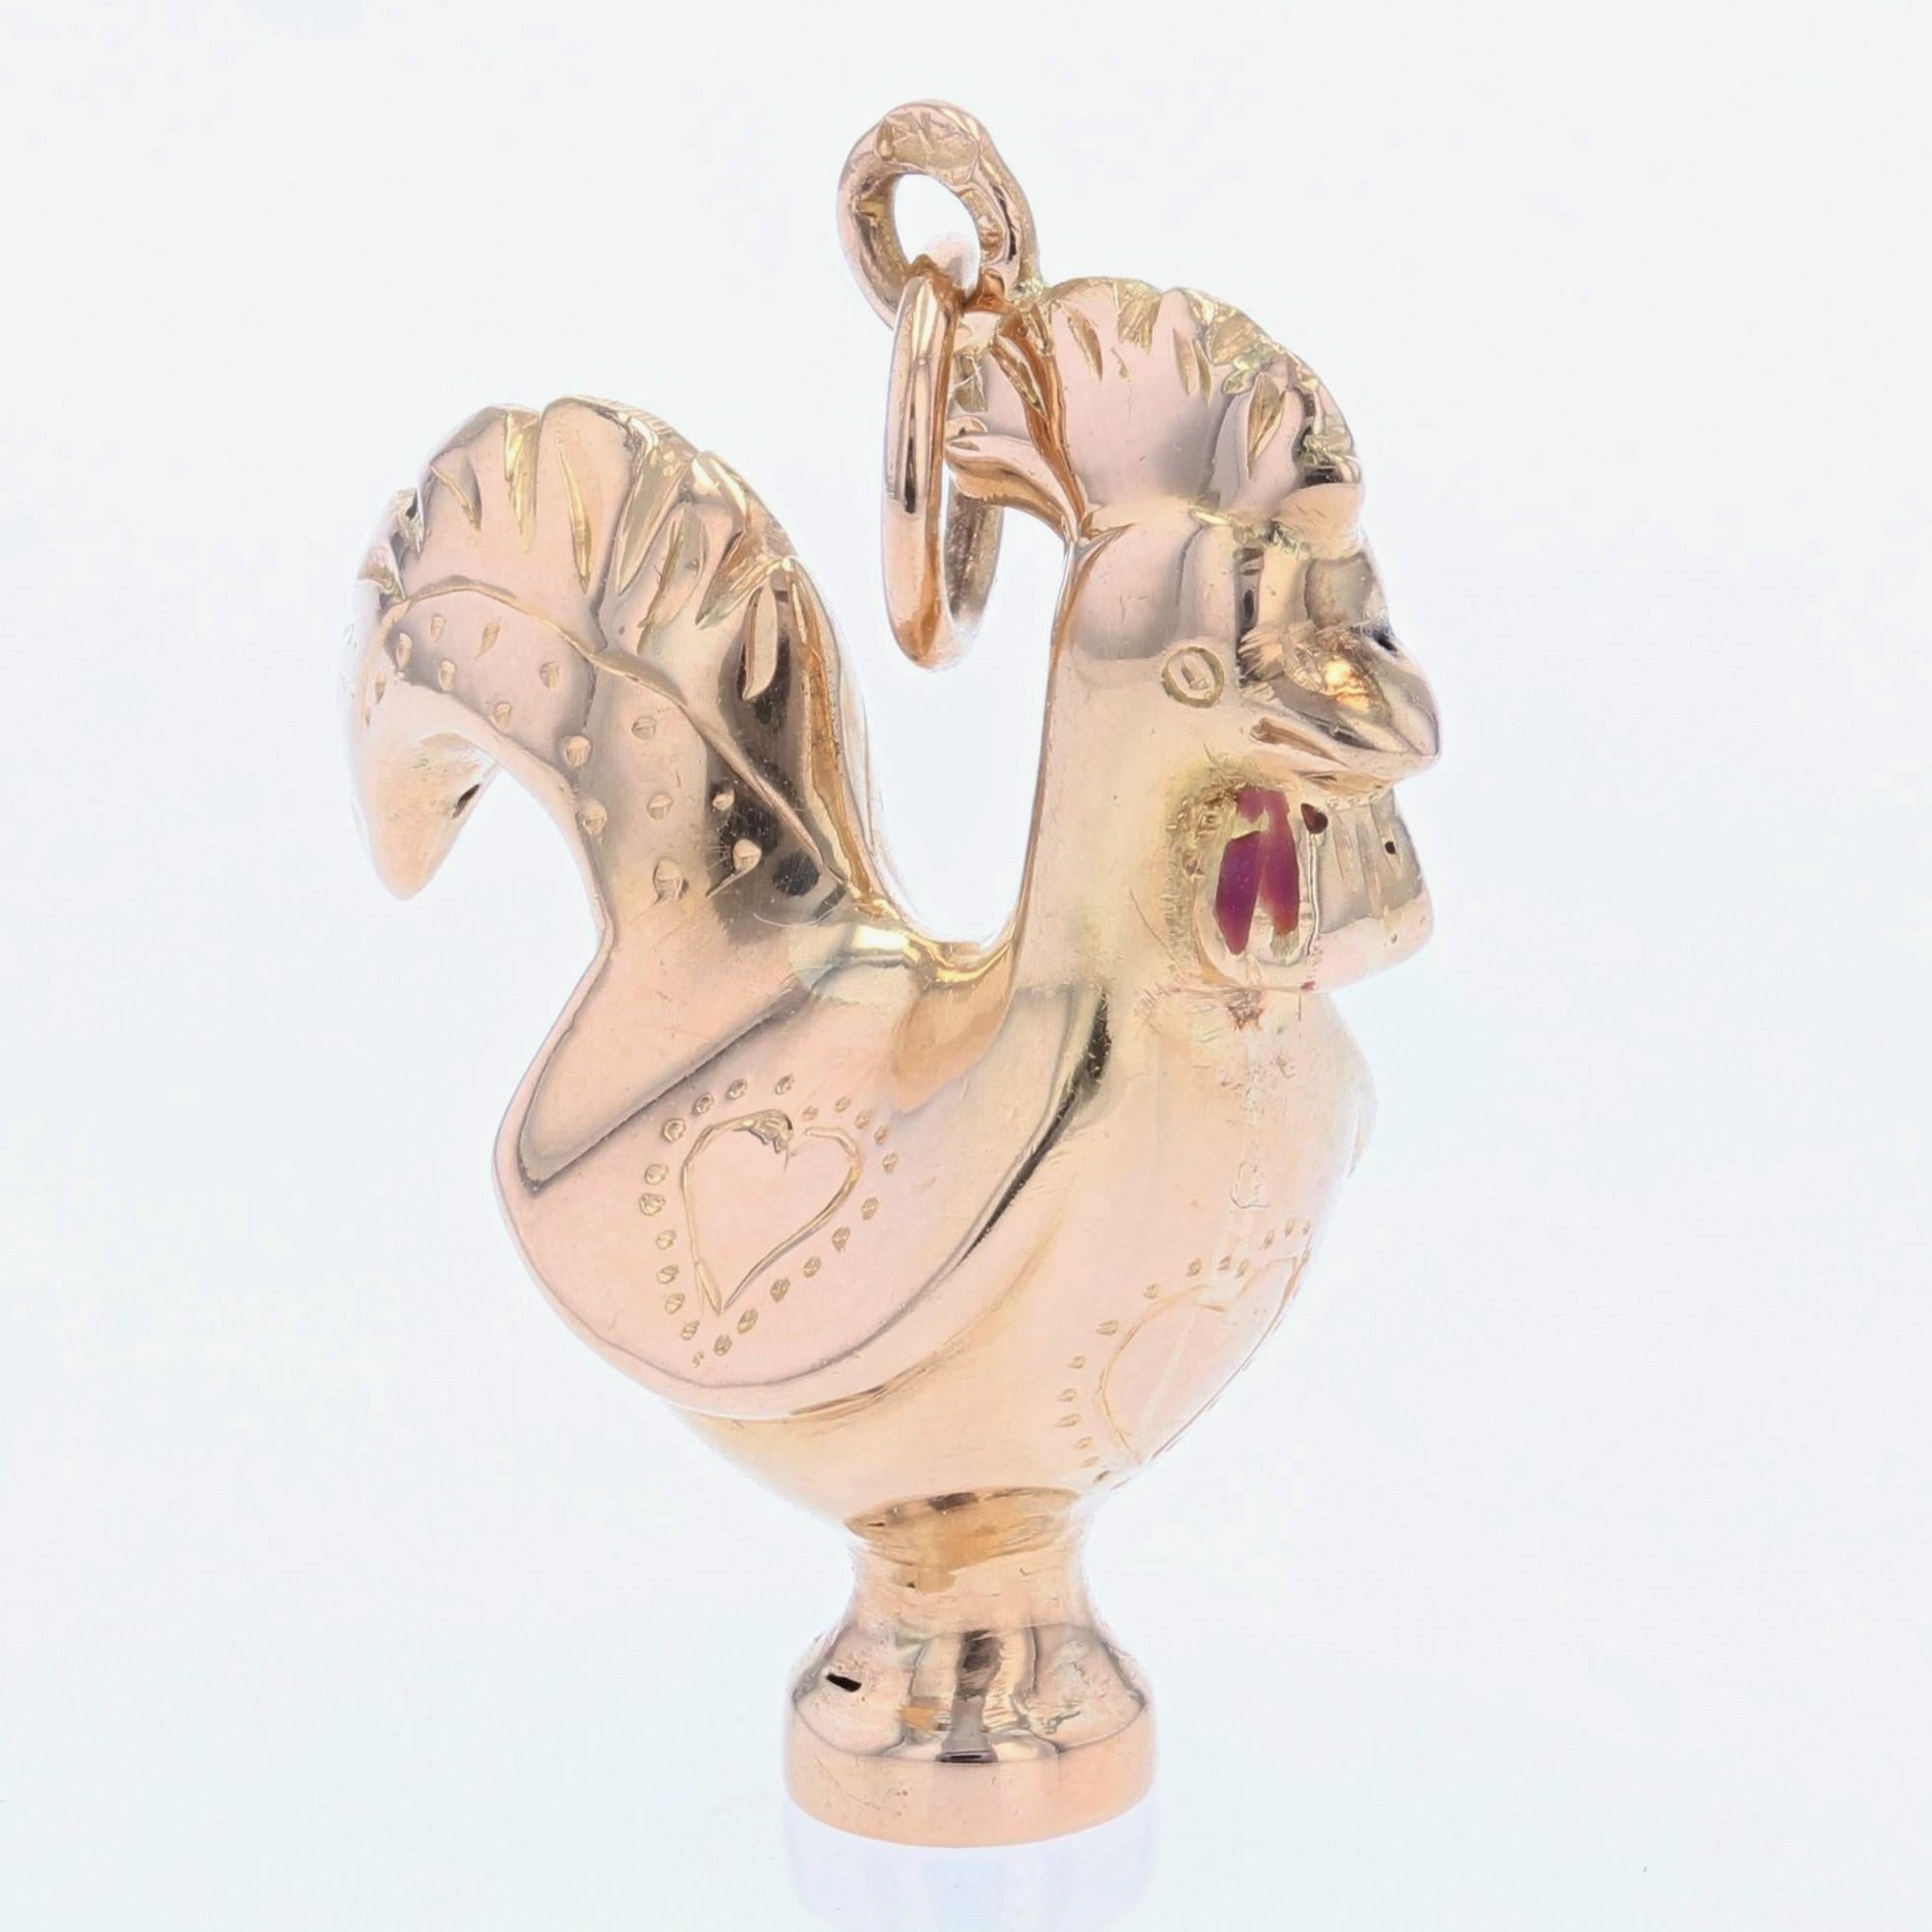 Pendant in 18 karat yellow gold.
Magnificent retro charm, it represents a rooster with chiseled details. 
Height : 3 cm, width : 21,7 mm, thickness : 11,3 mm approximately.
Total weight of the jewel : 2,7 g approximately.
Authentic retro jewel -